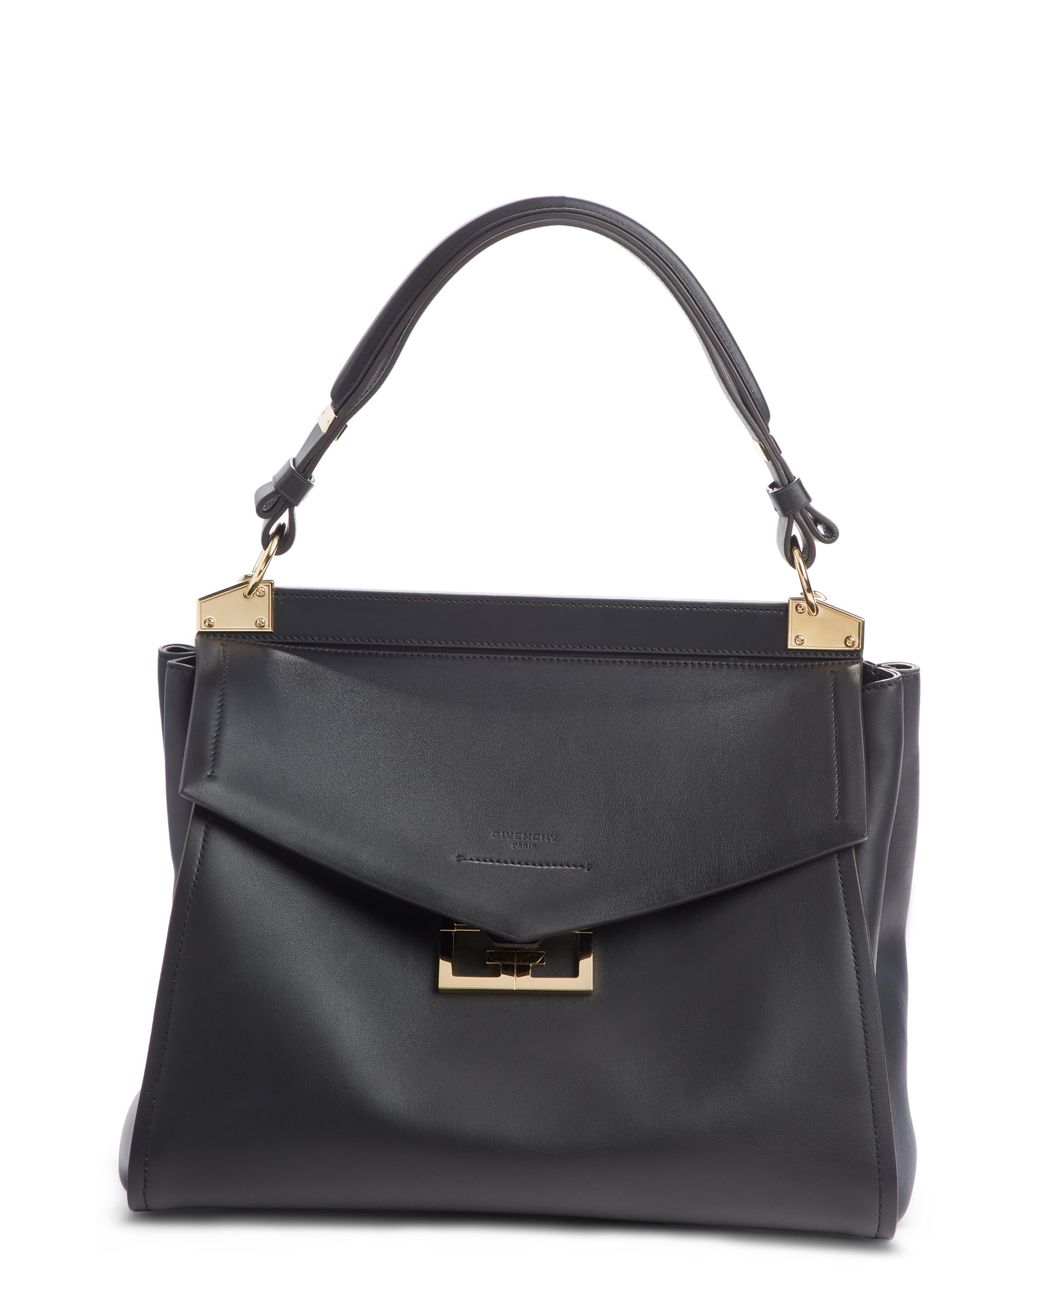 Givenchy Small Mystic Leather Top Handle Bag in Black - Save 21% - Lyst